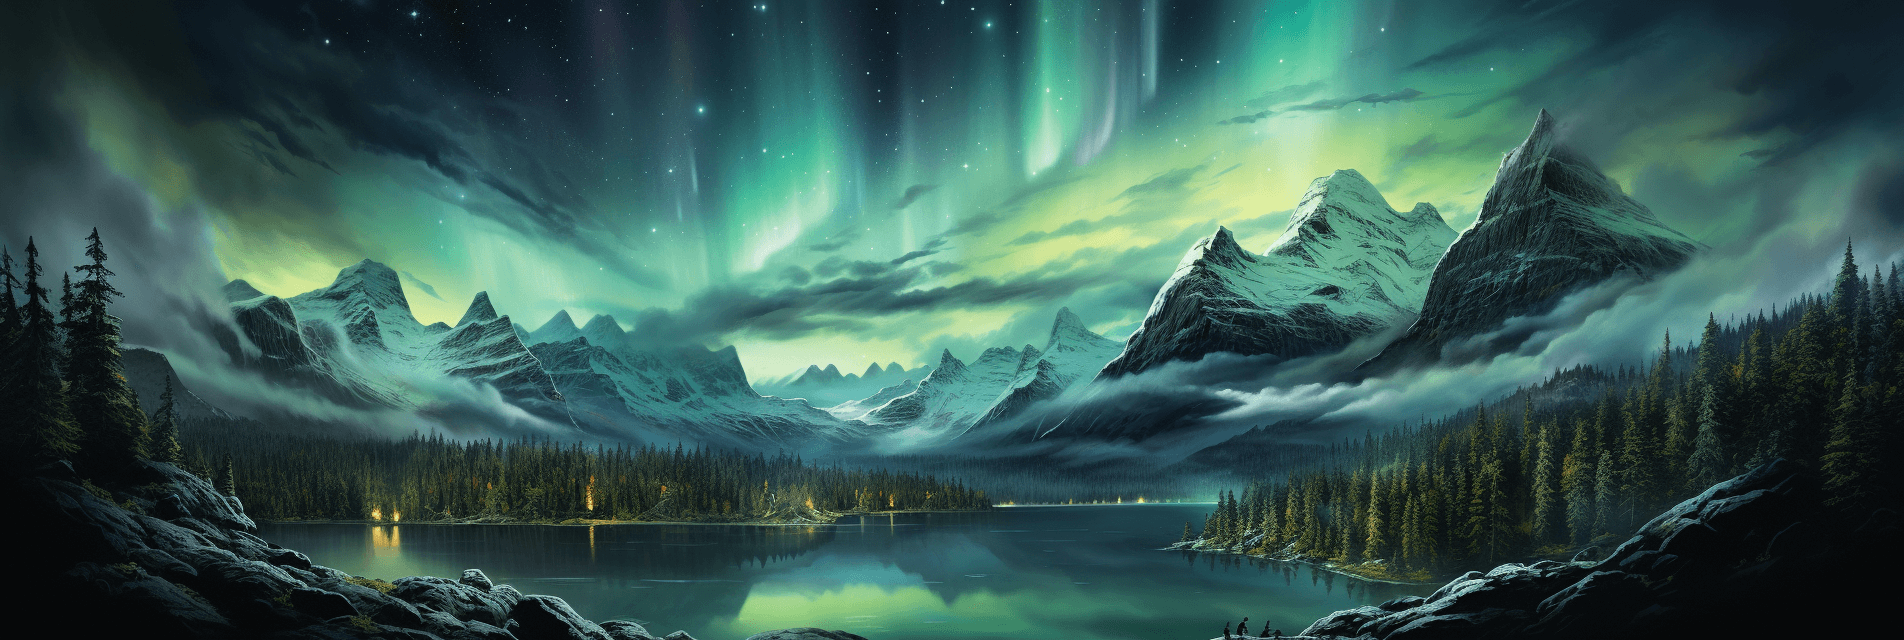 Northern Lights and Starry Skies